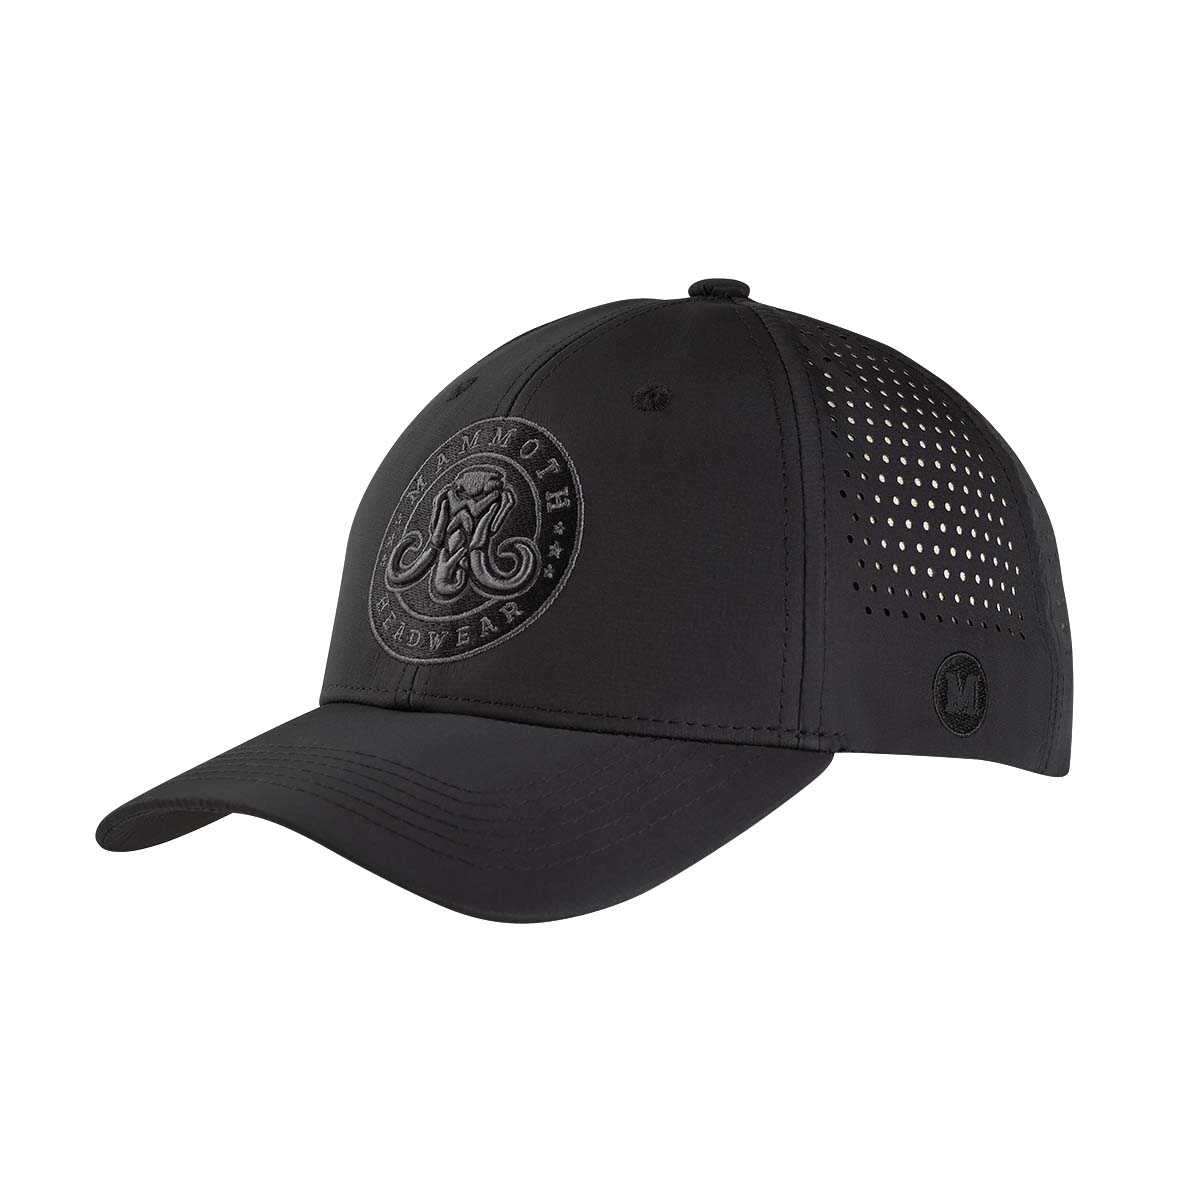 Classic Performance Hat - Blacked Out